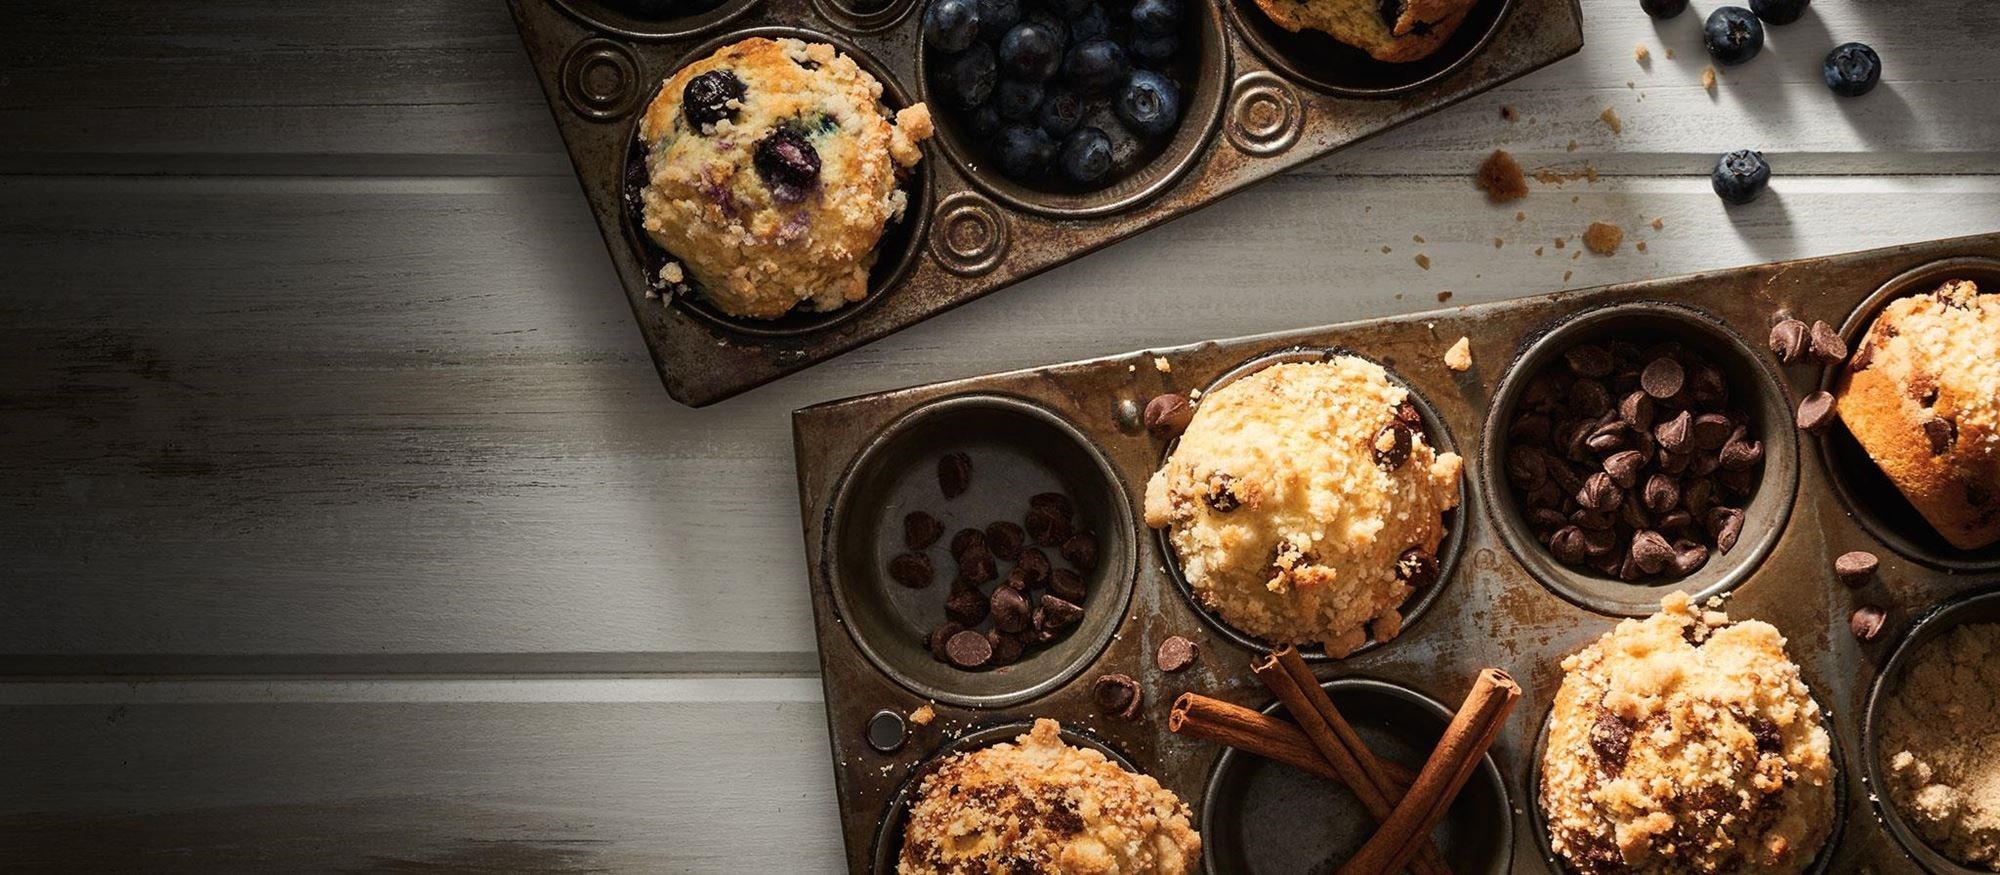 FOOD_MUFFINS_ASSORTED_SLG_51617